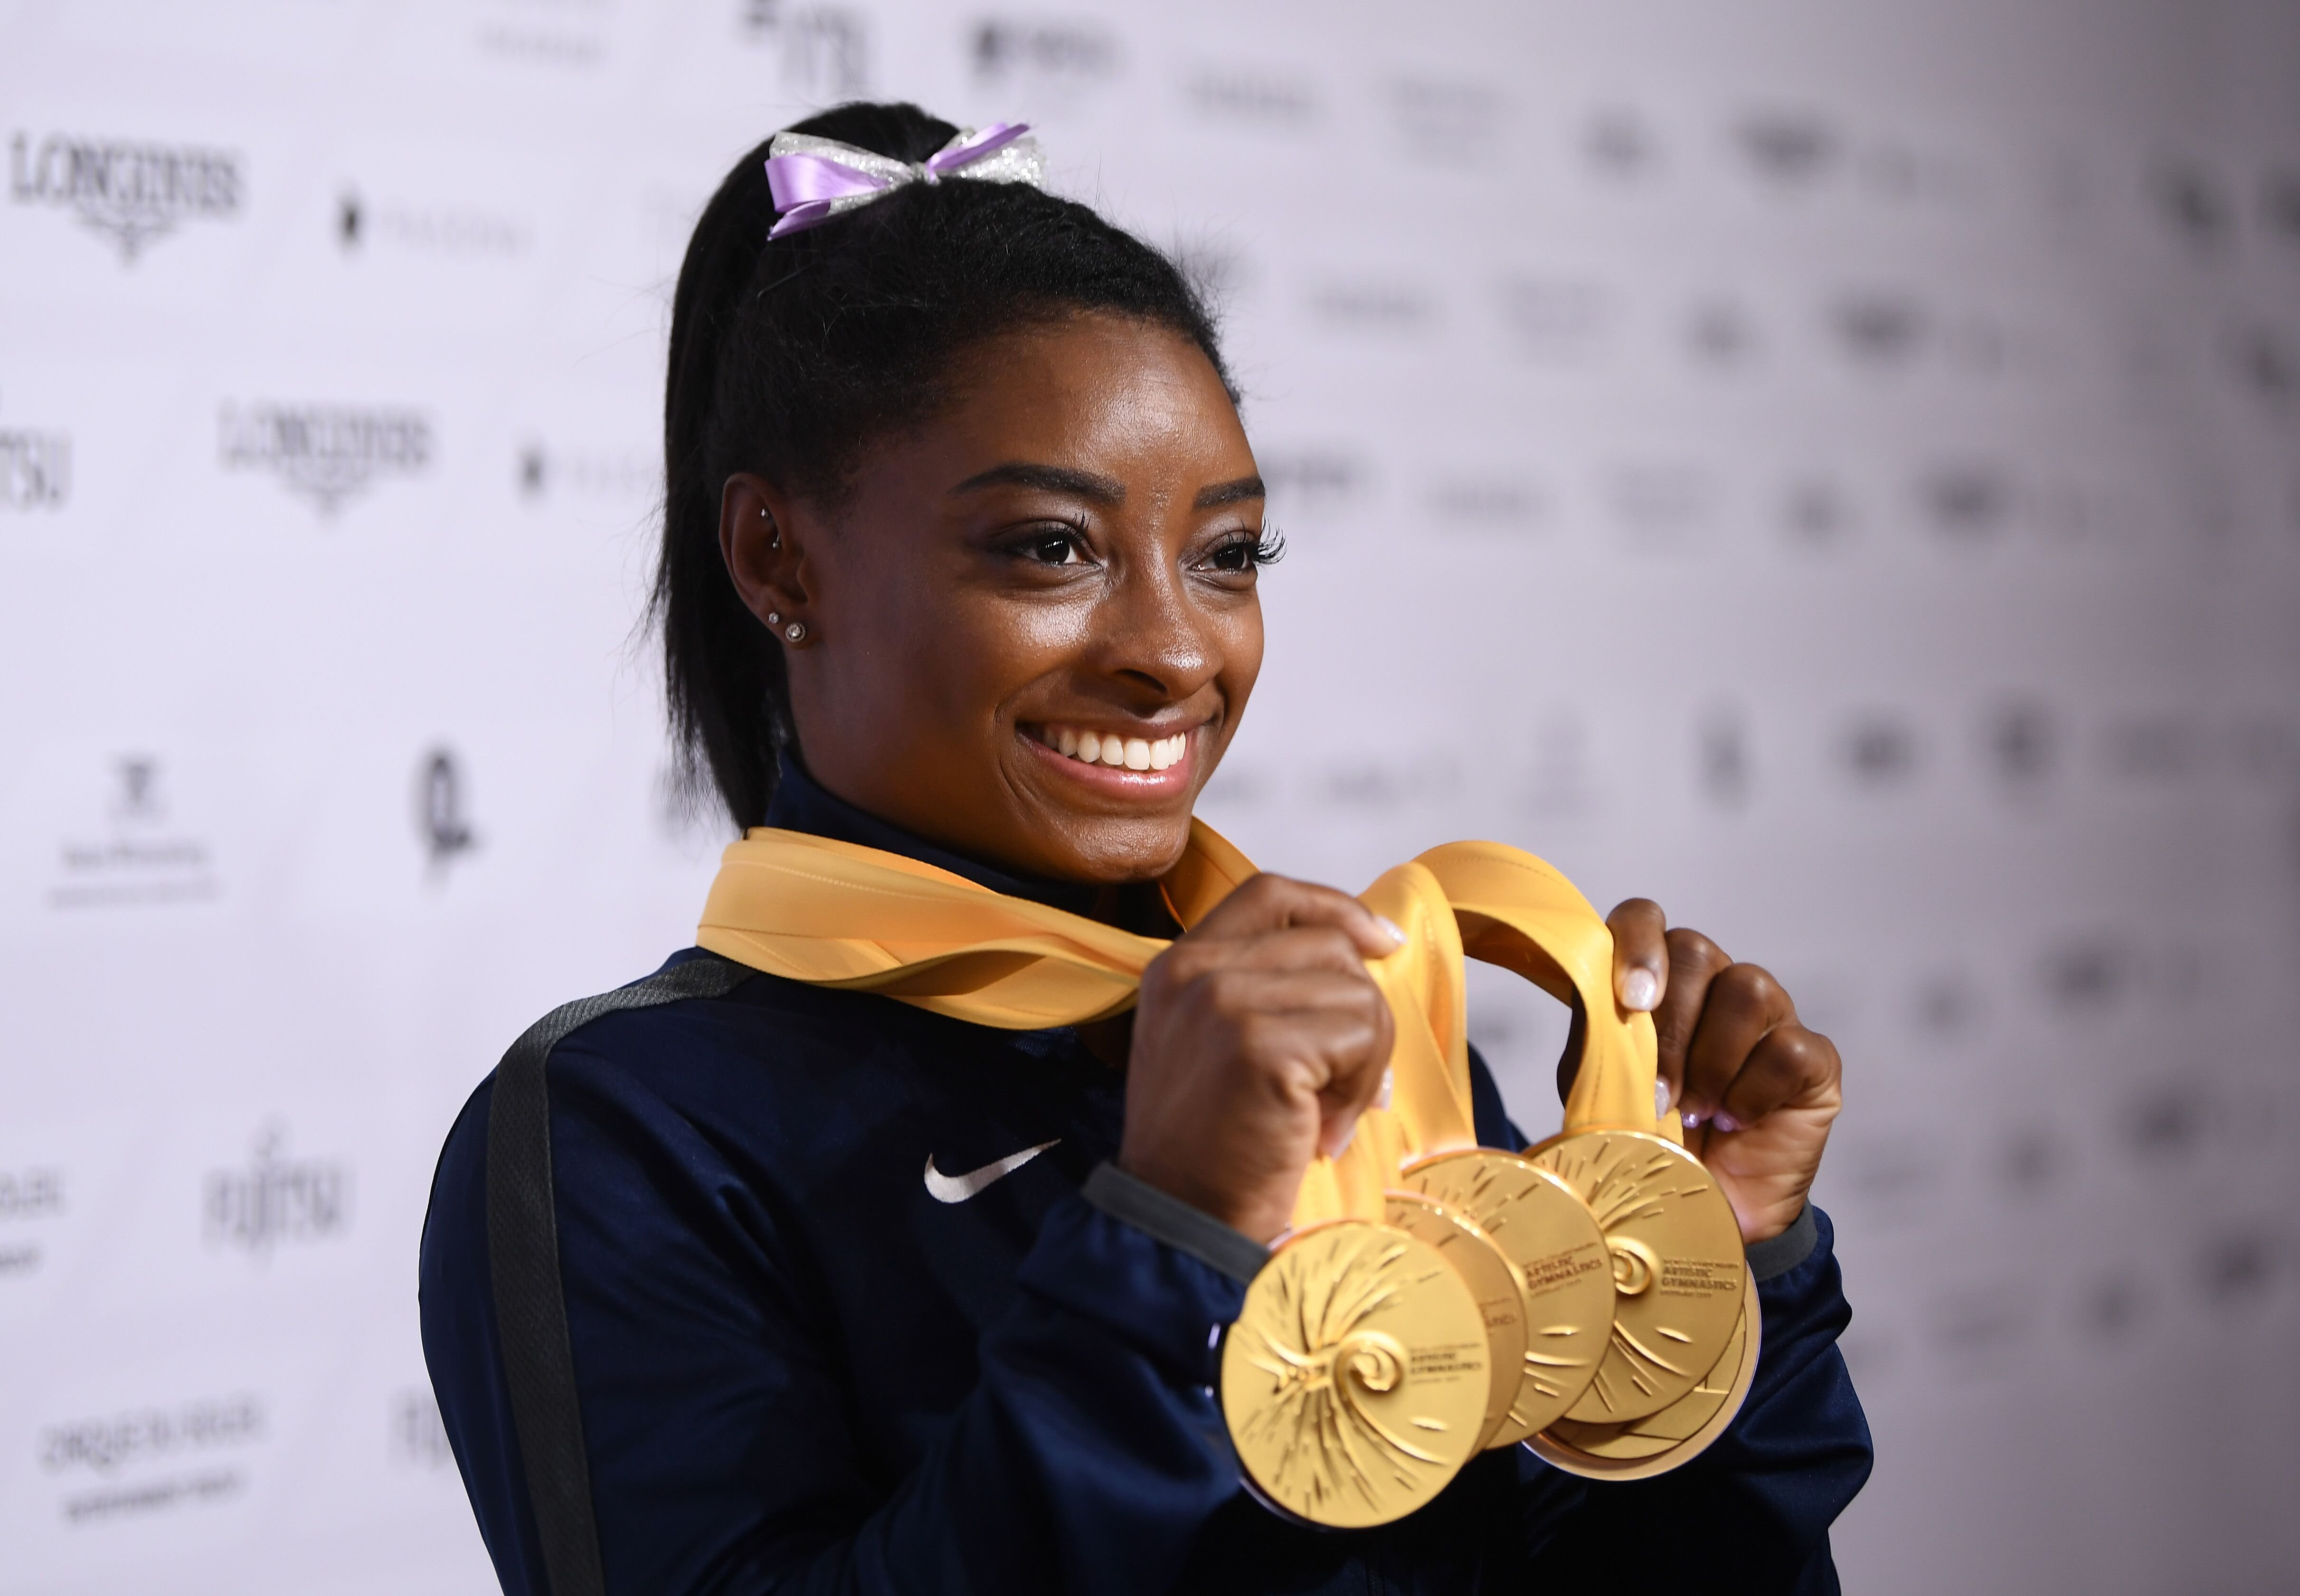 Simone Biles holding up her medals | Source: Getty Images/GlobalImagesUkraine